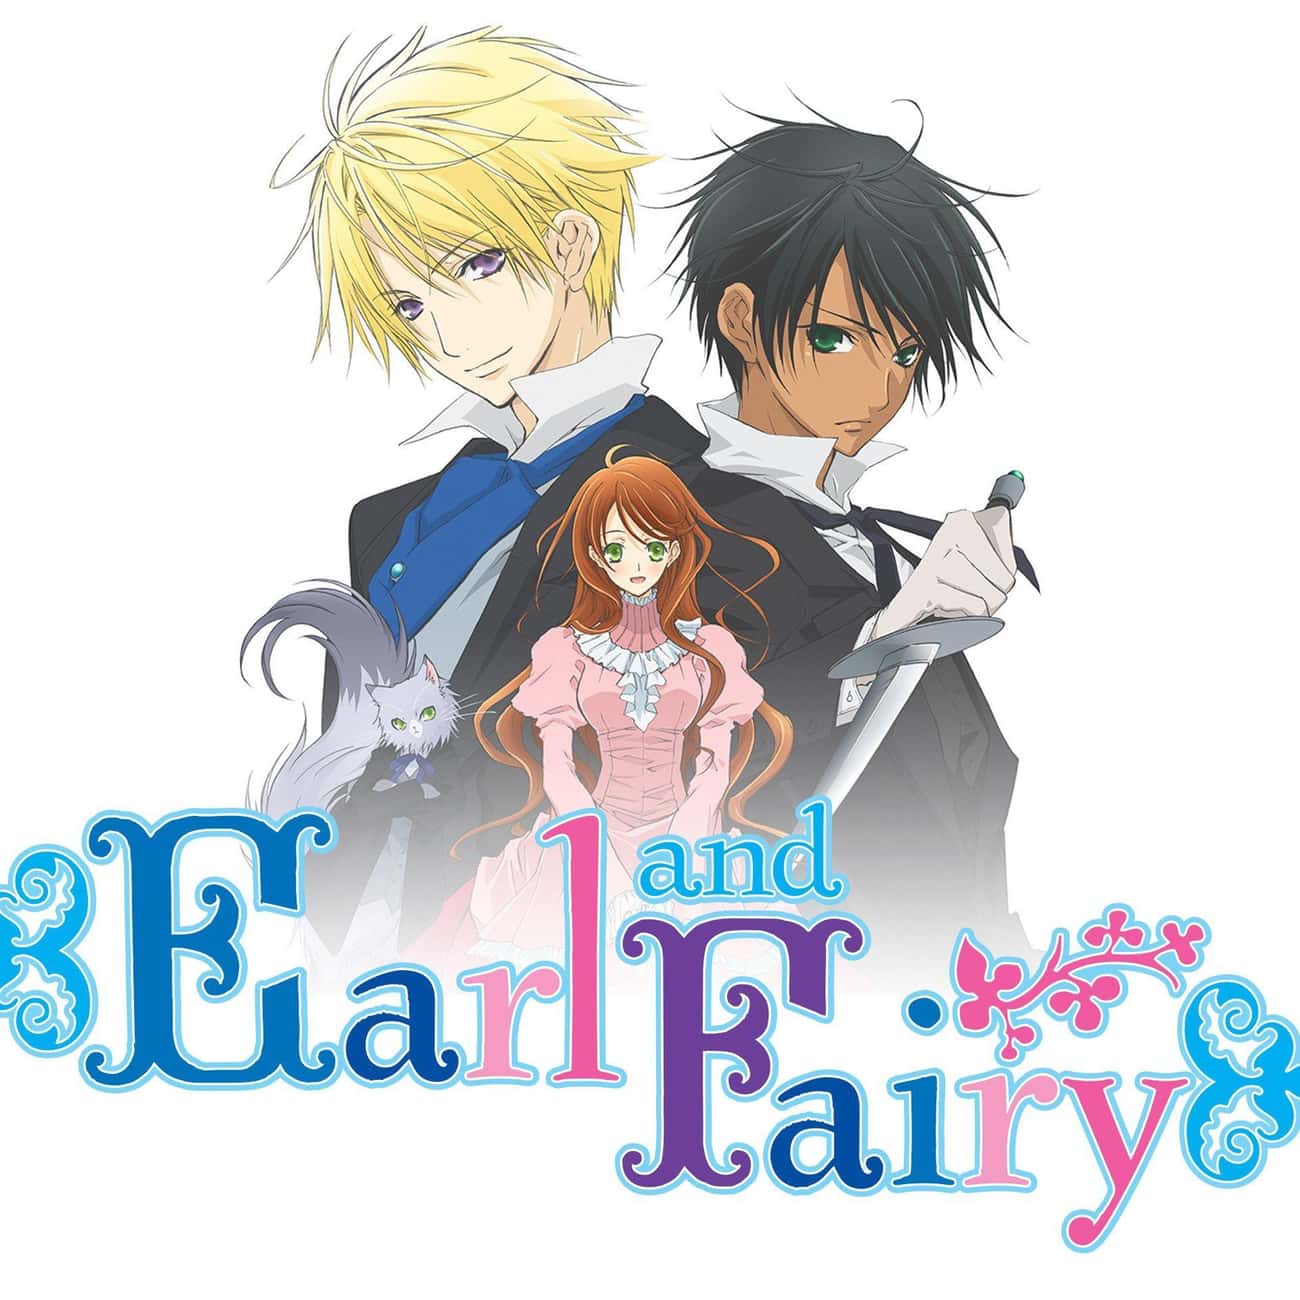 The Earl and the Fairy